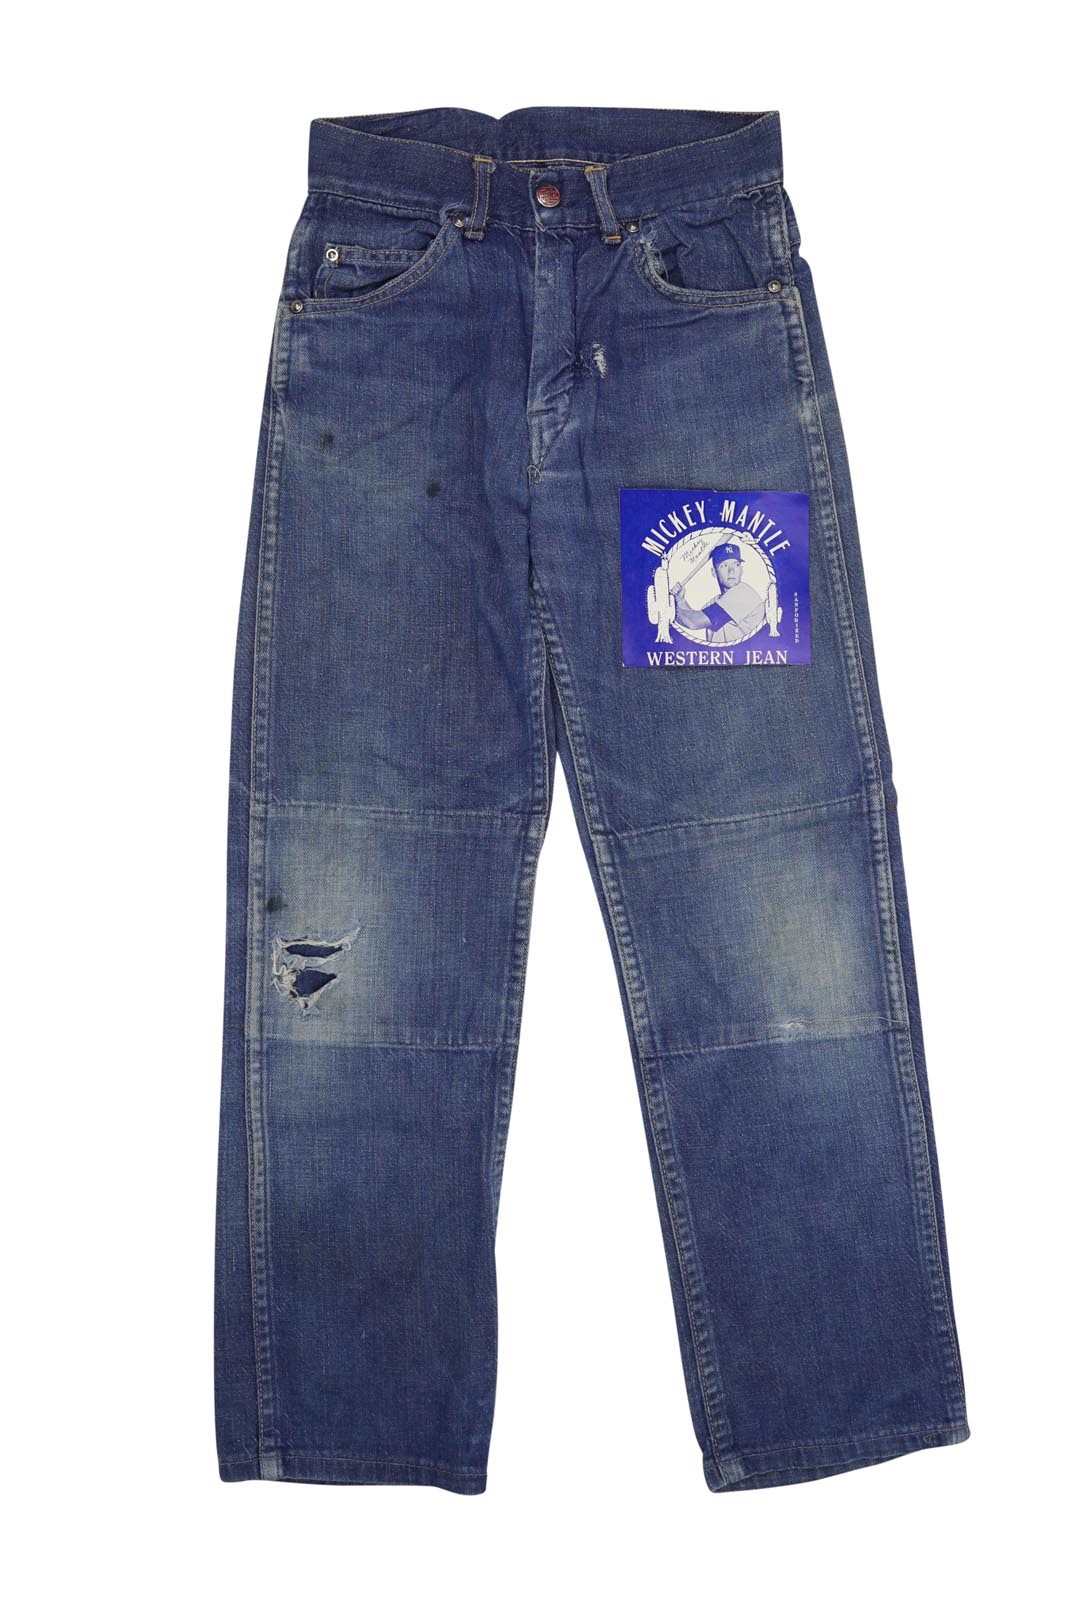 - 1960's Mickey Mantle Jeans